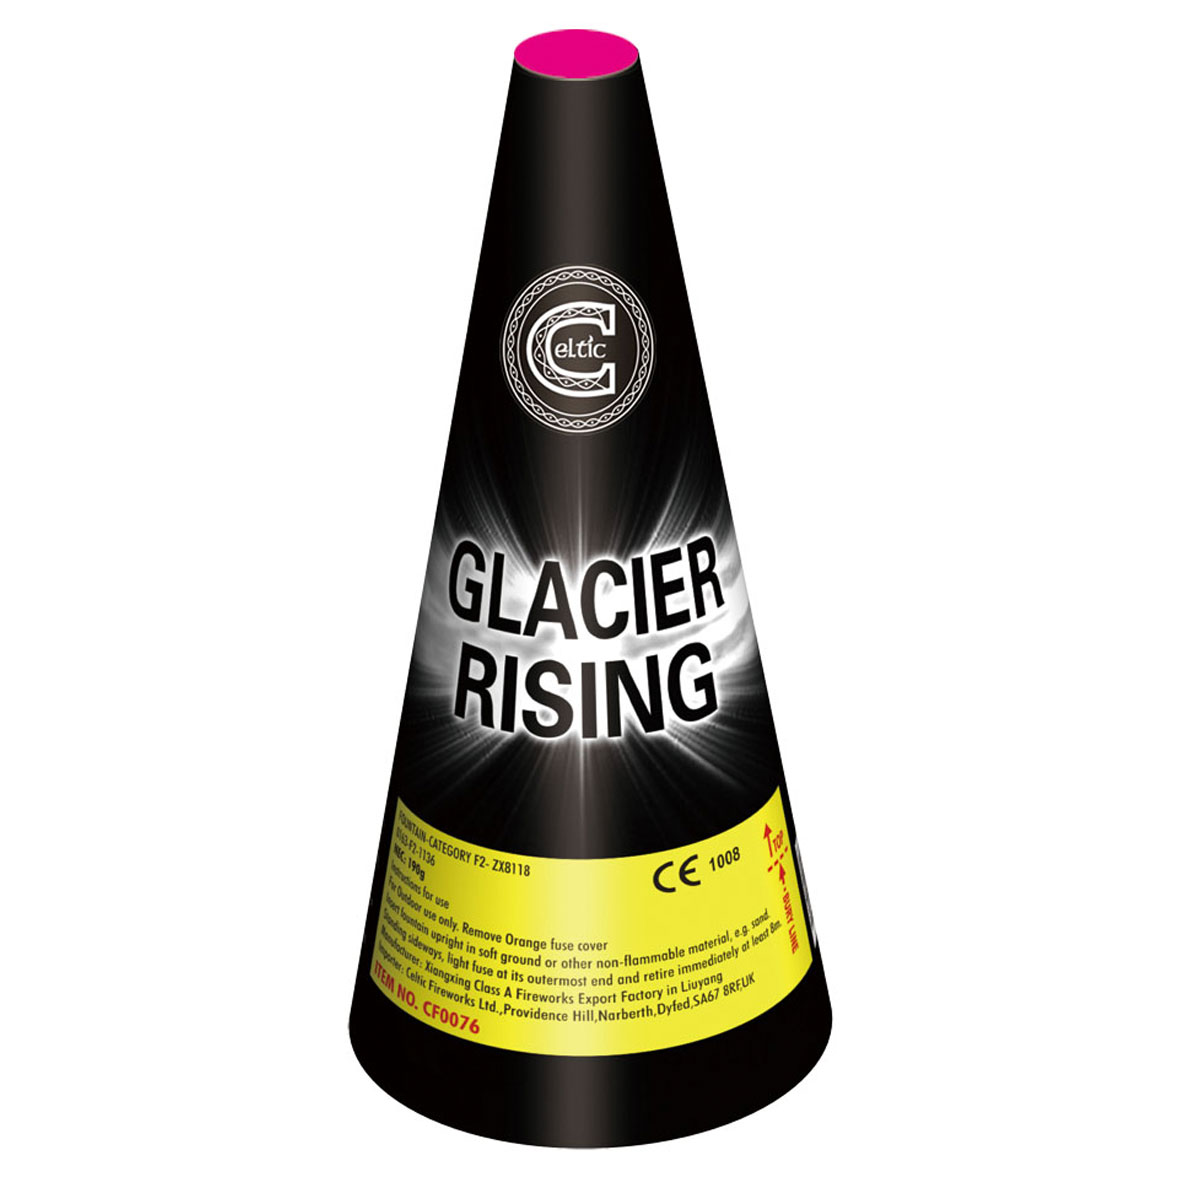 glacier rising by celtic fireworks available at Paul's fireworks